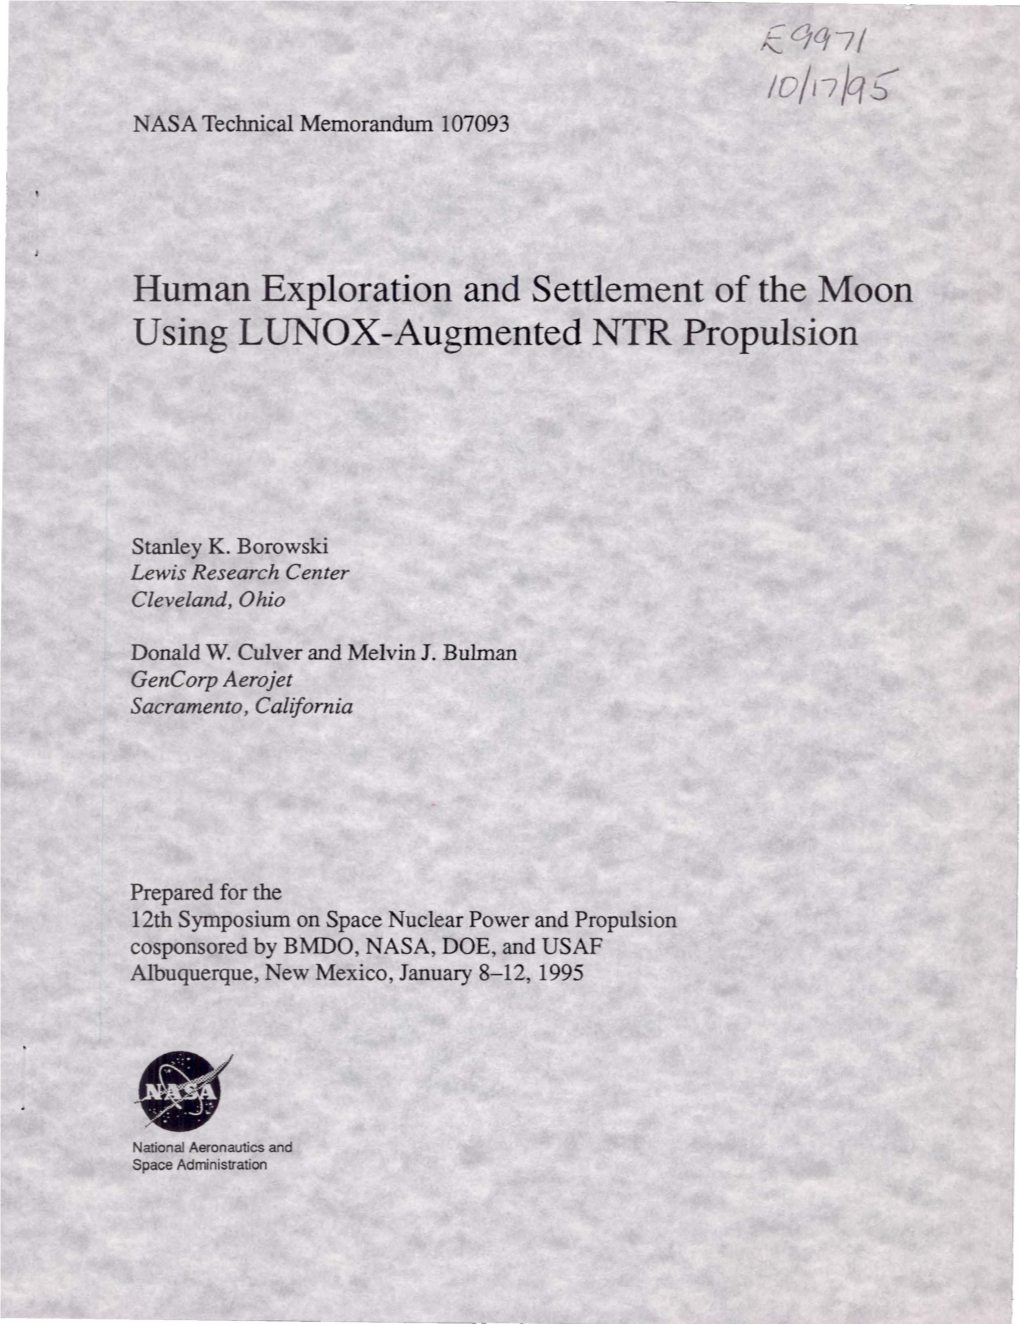 Human Exploration and Settlement of the Moon Using LUNOX-Augmented NTR Propulsion